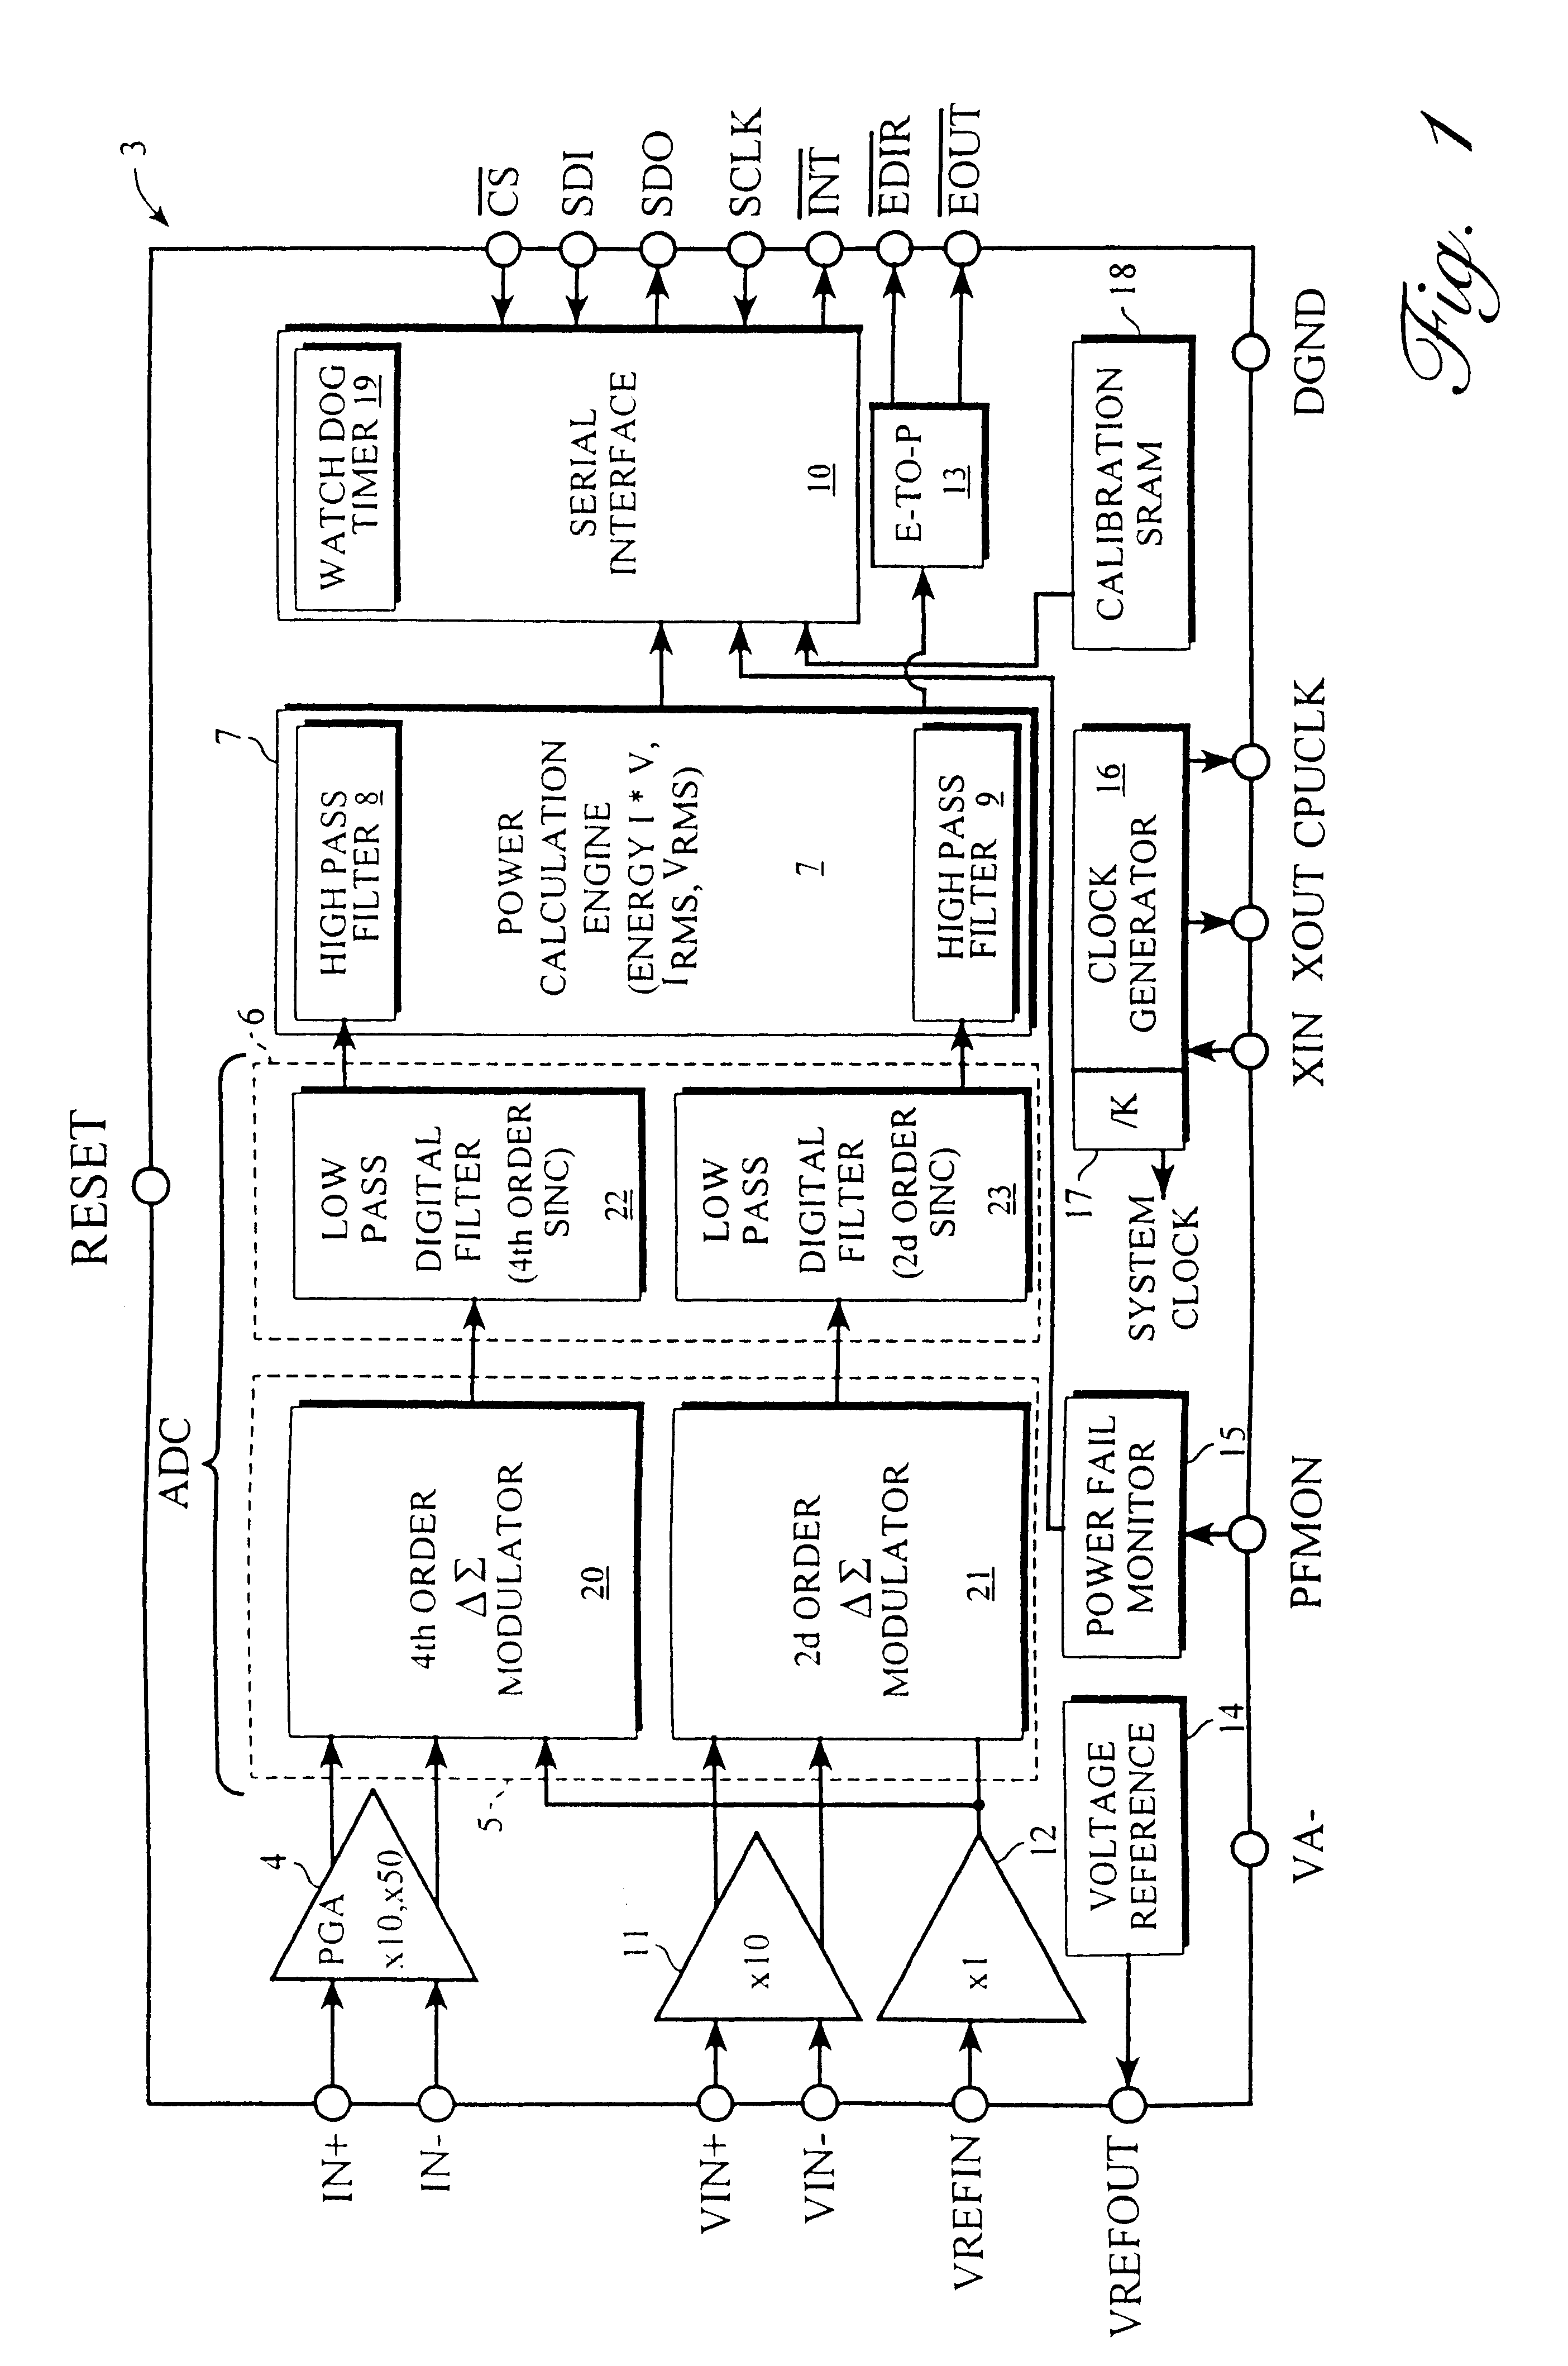 Single phase bi-directional electrical measurement systems and methods using ADCs